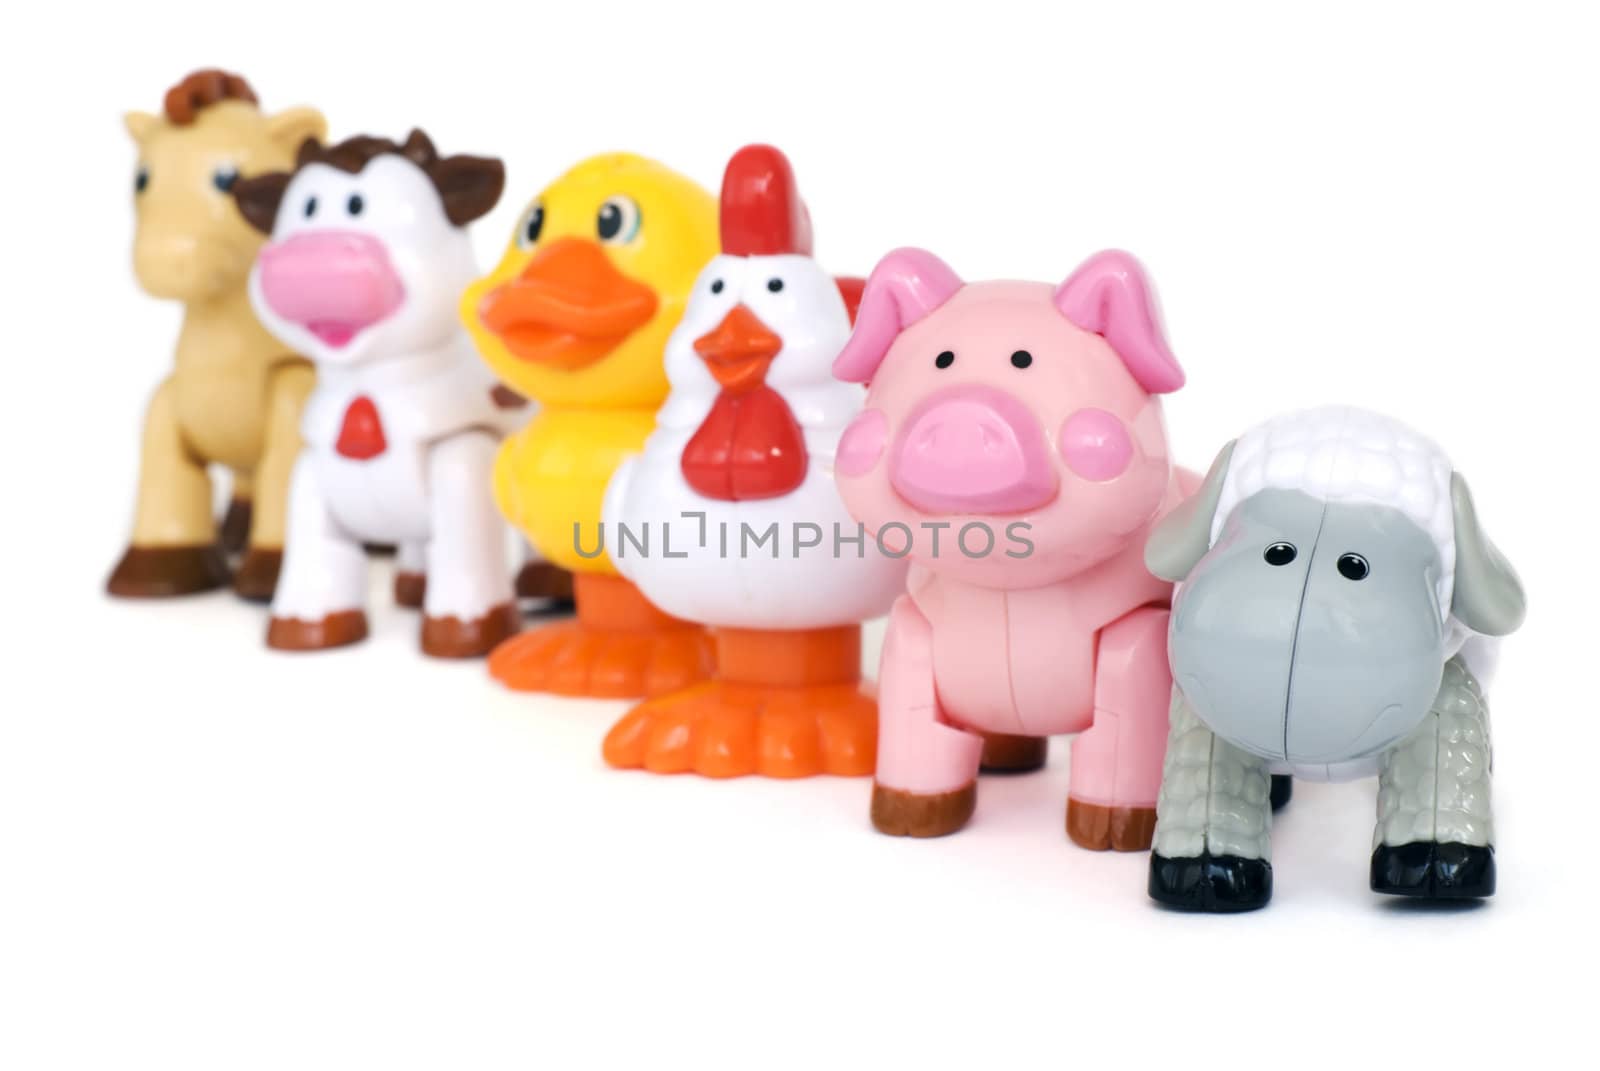 Color animal toys standing in a row